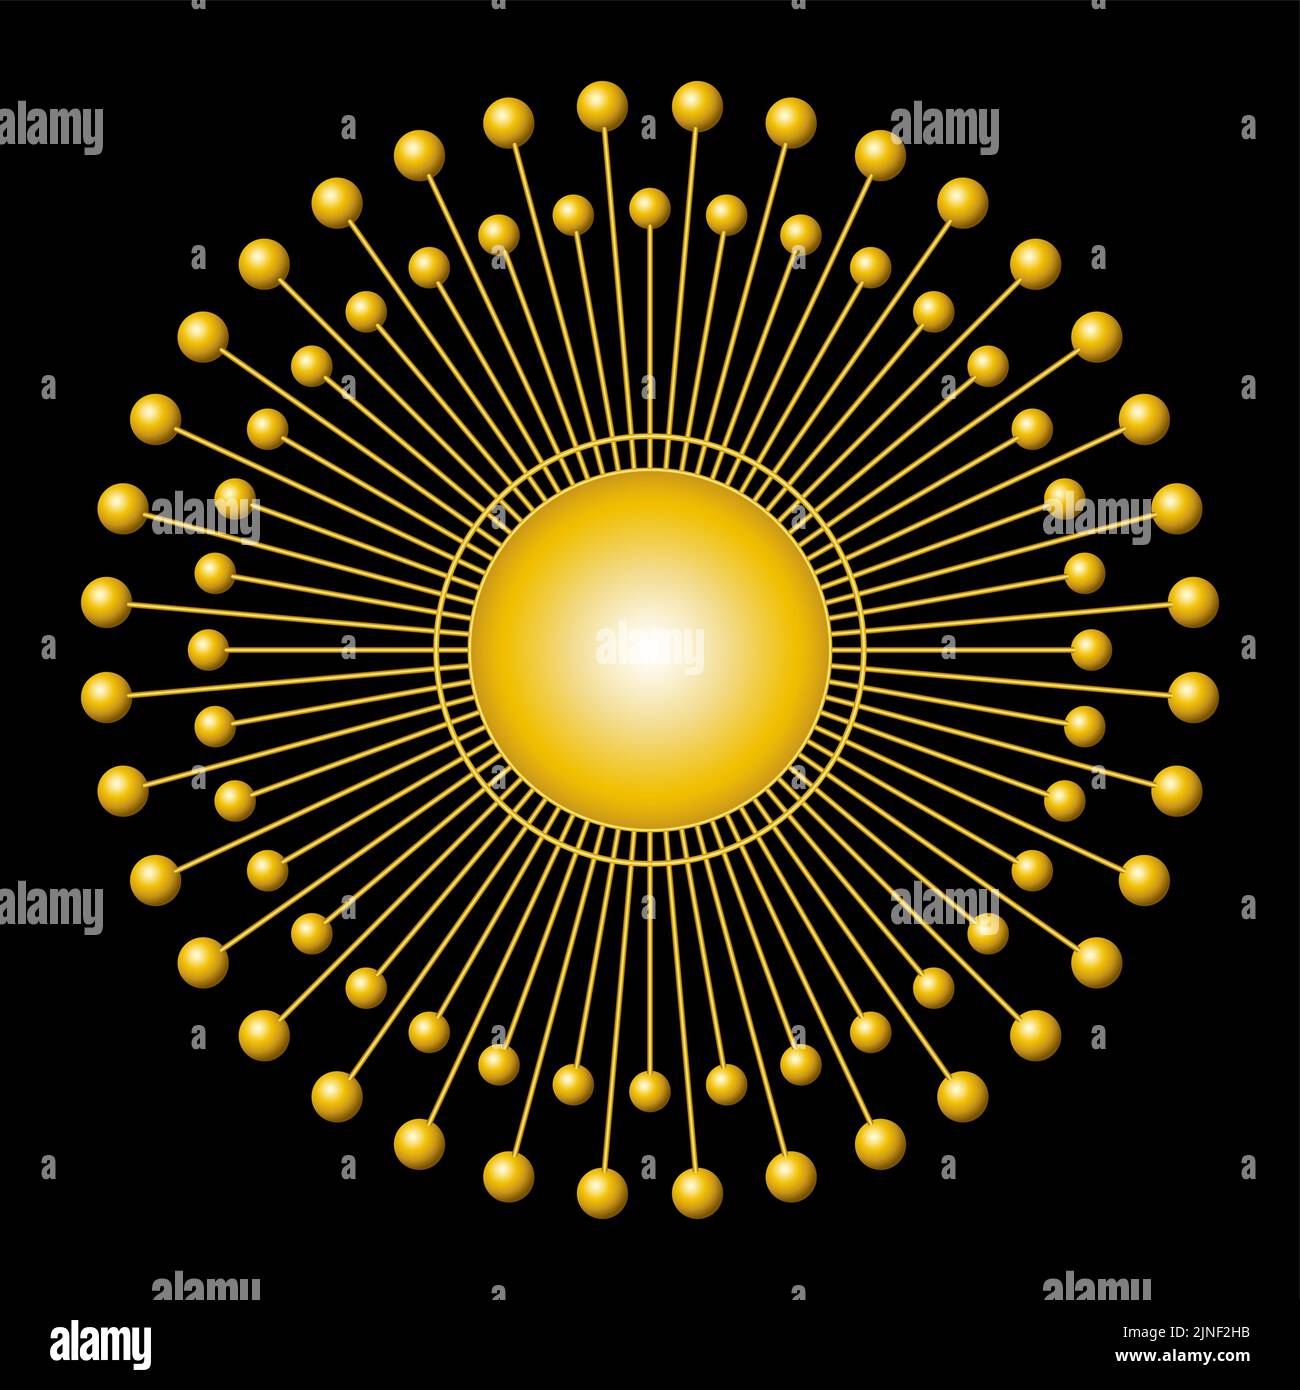 Golden sun symbol. Solar disk with 72 rays of light, with spheres on each end, around a golden circle in the center. Stock Photo